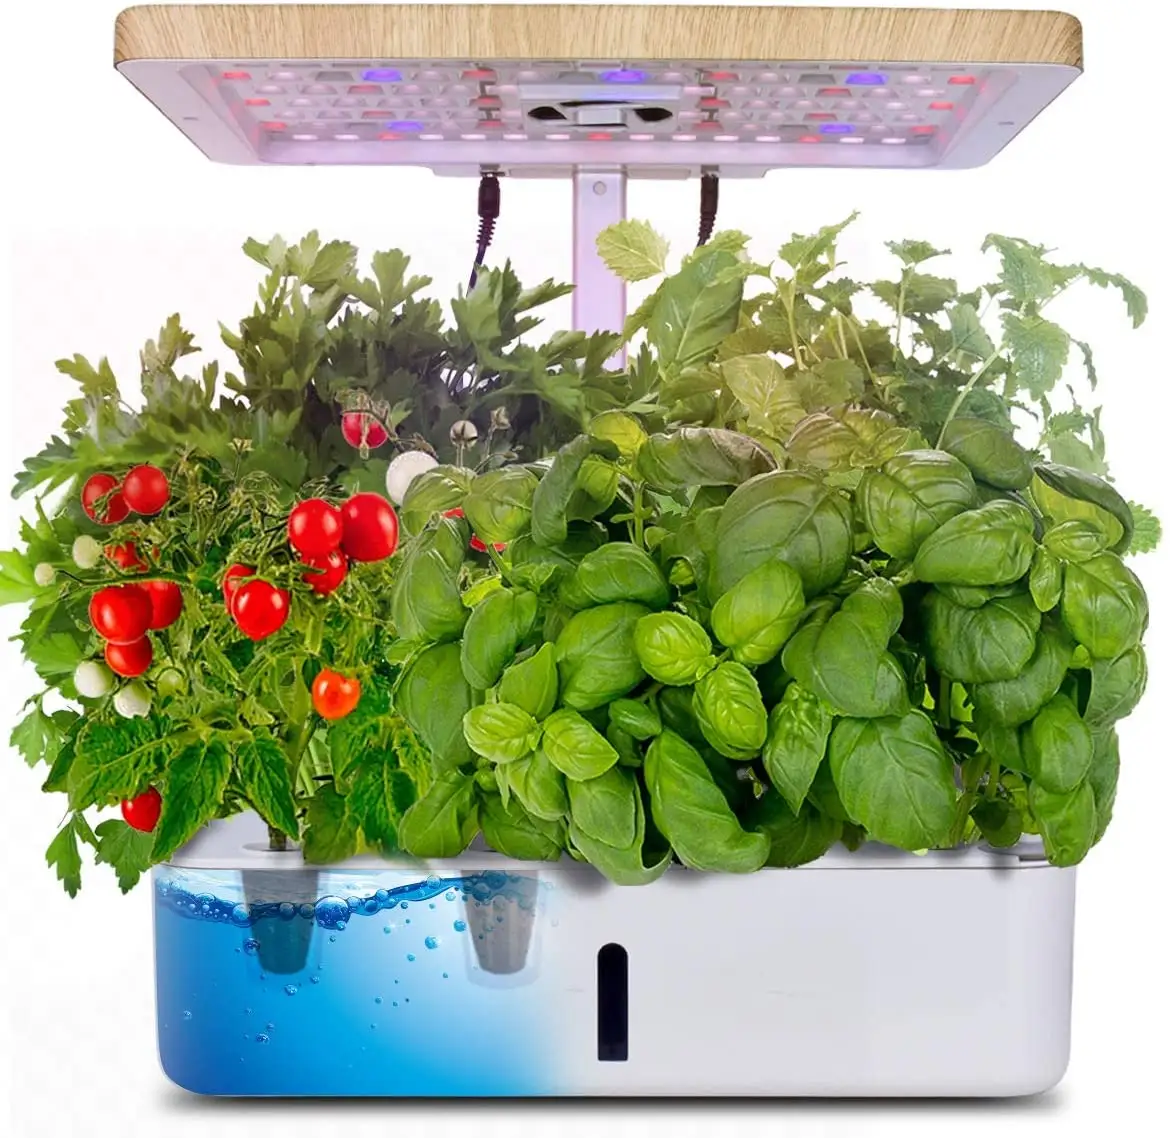 2023 hot selling hydroponic growing system 12-hole desktop hydroponic plant kit for home green leafy plant growth